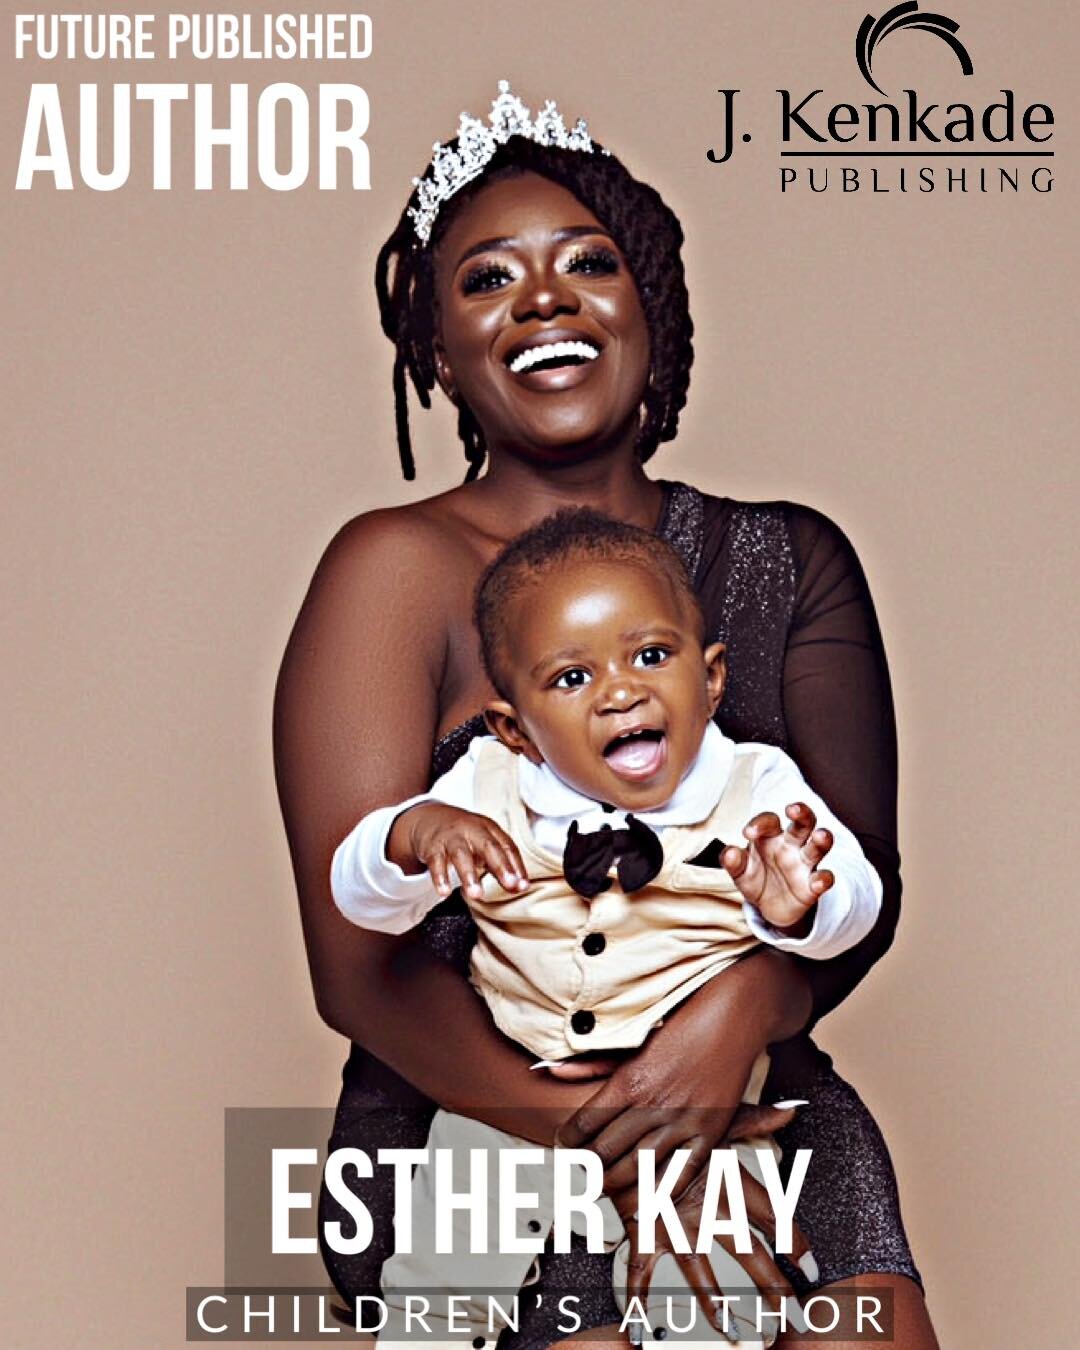 Welcome to J. Kenkade Publishing Ms. Esther Kay. Be on the lookout for her amazing new Children&rsquo;s book coming soon! 🎉 

We are a National Certified Midsize Publisher and Author School offering Authors 100% Author Royalties. Authors keep their 